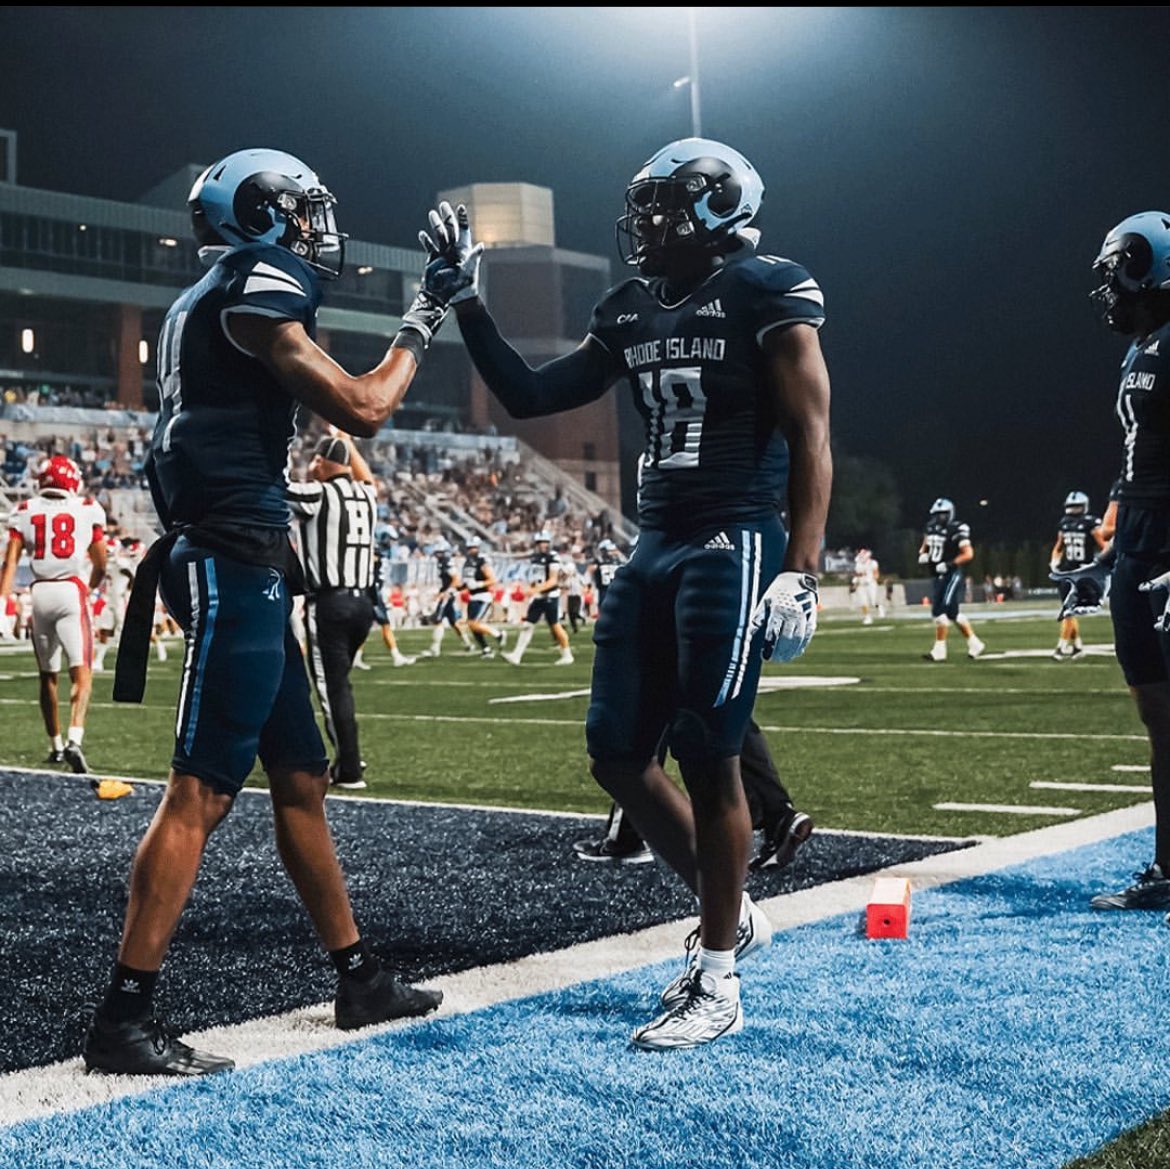 After a great workout and conversation with @Coach_Loftus i’m blessed to receive an offer from @RhodyFootball 🐏🌊 @CoachJeffMoore @TASeawolfFB @MohrRecruiting @BrianDohn247 @RivalsFriedman